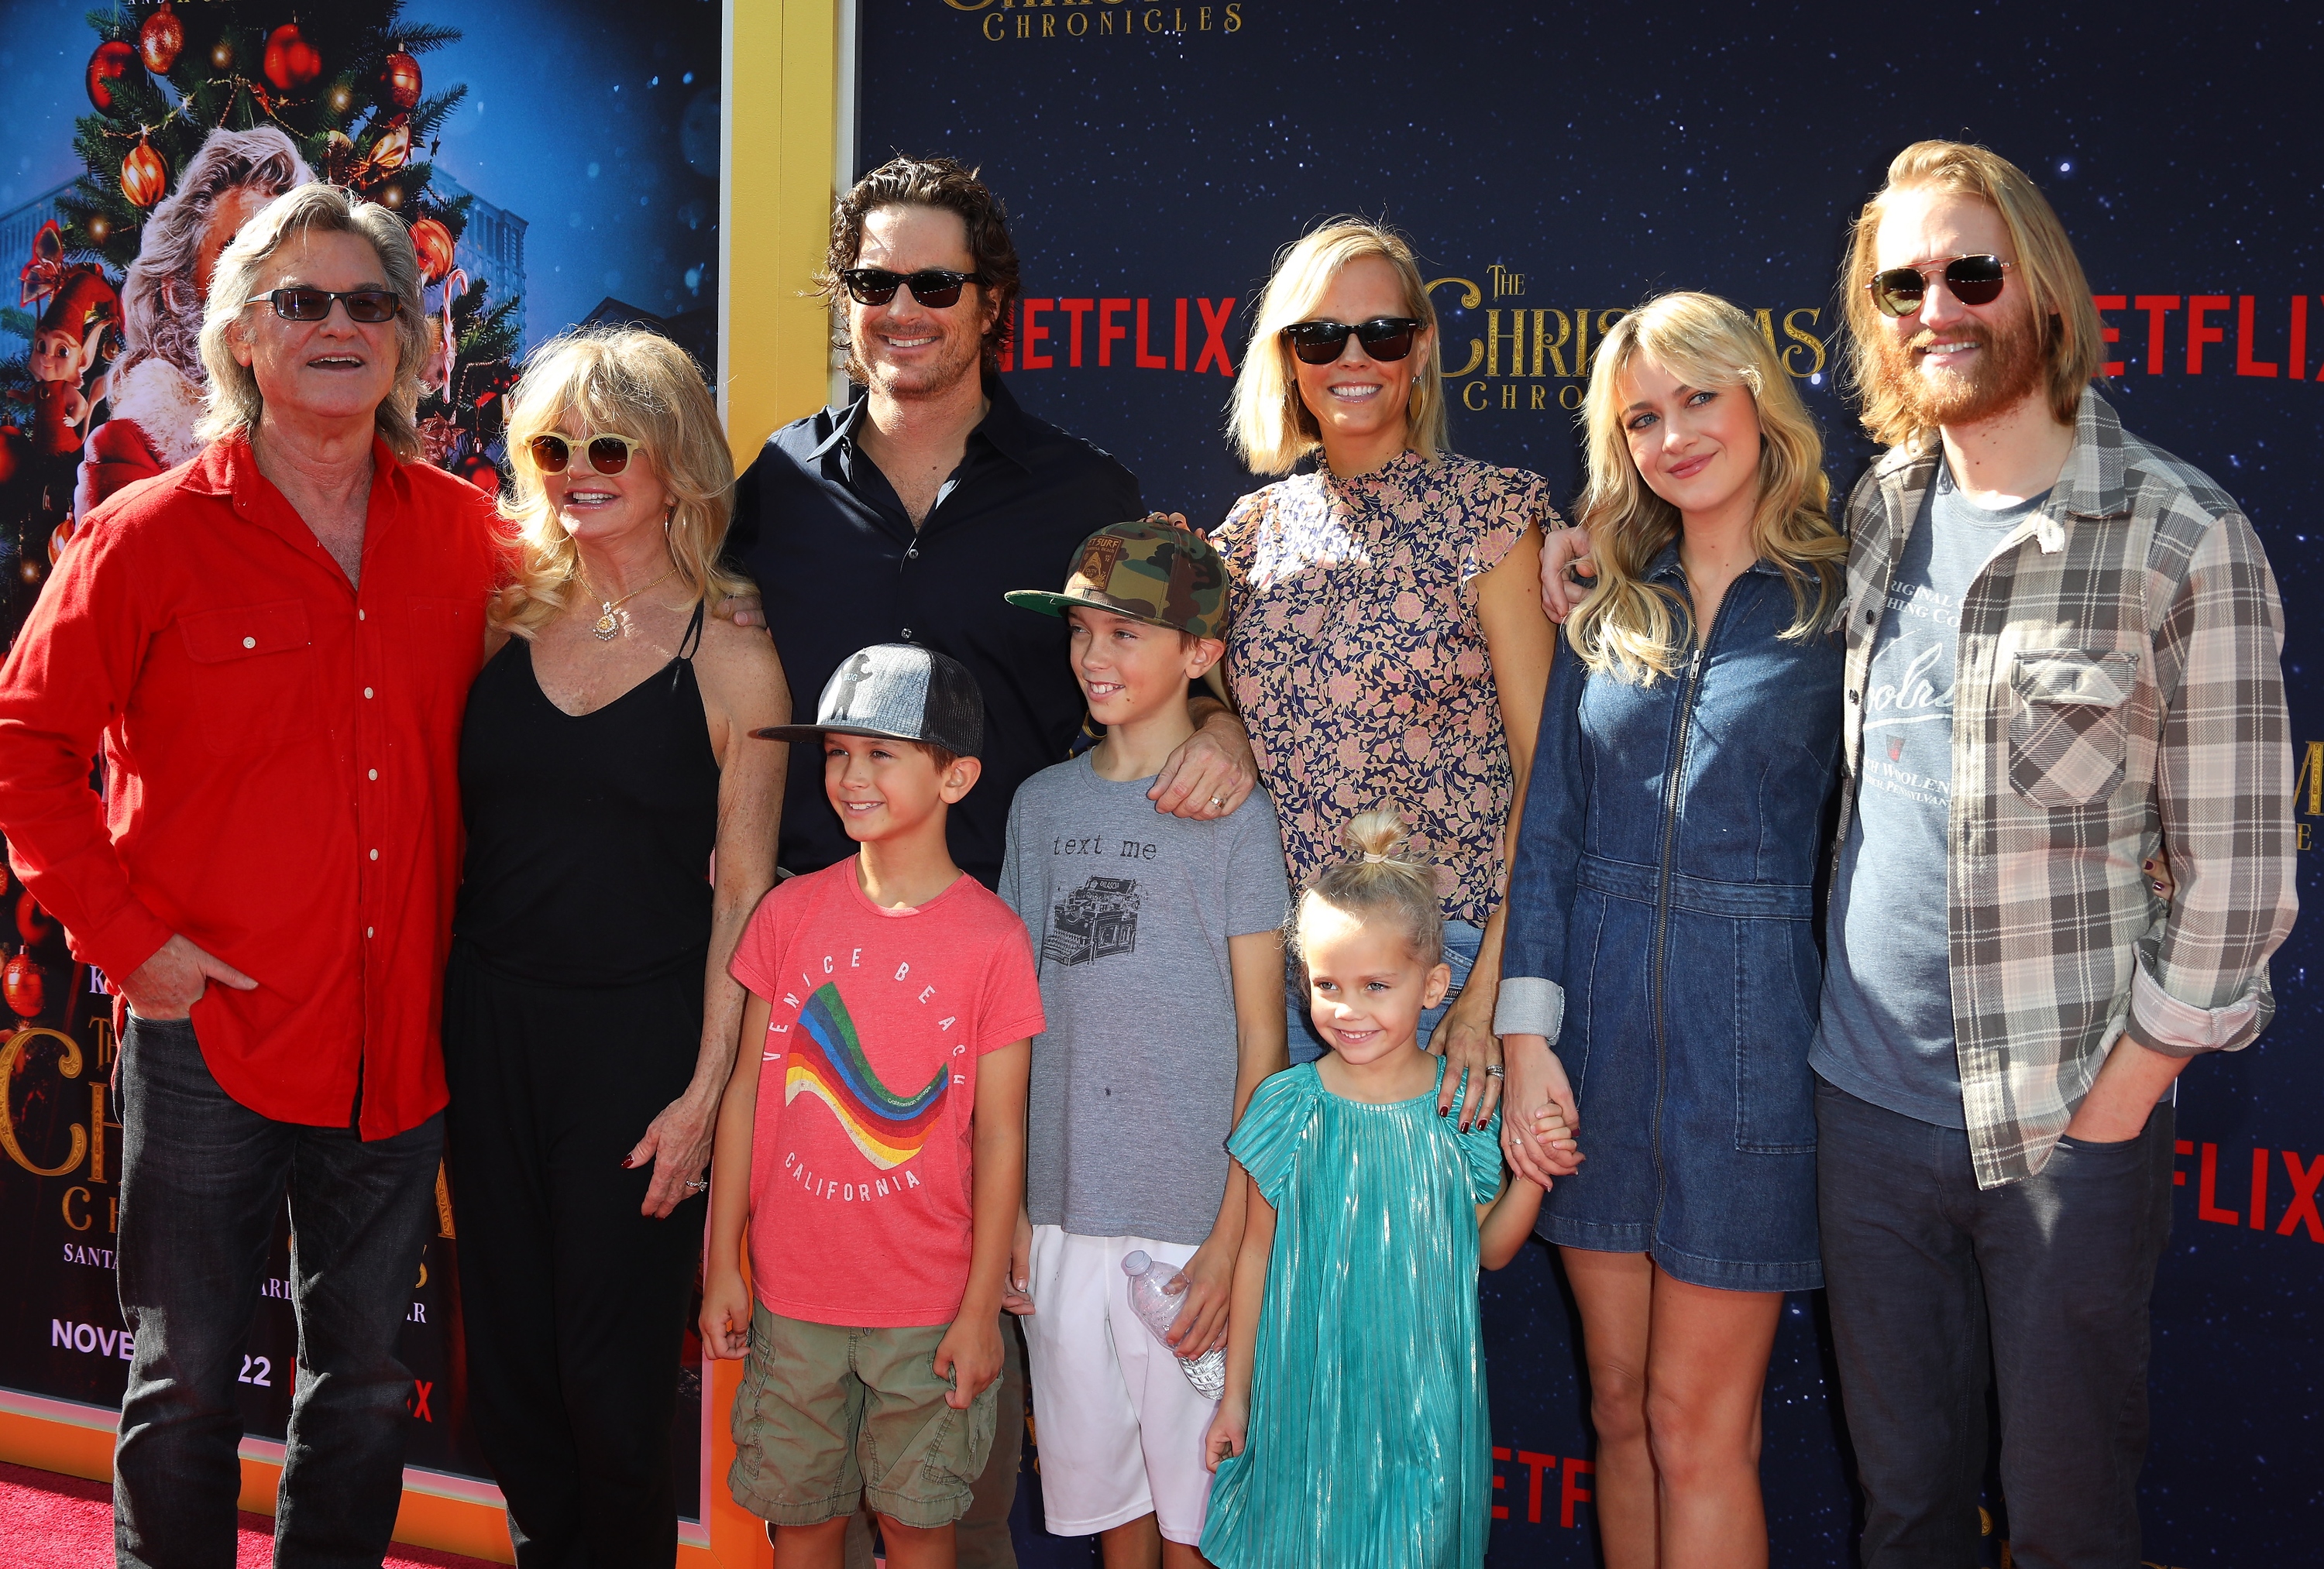 Goldie Hawn, Kurt Russell, Oliver Hudson, Erinn Bartlett, Meredith Hagner, and Wyatt Russell, along with the children Rio, Bodhi, and Wilder Hudson, attend the Los Angeles premiere of "The Christmas Chronicles" on November 12, 2018. | Source: Getty Images